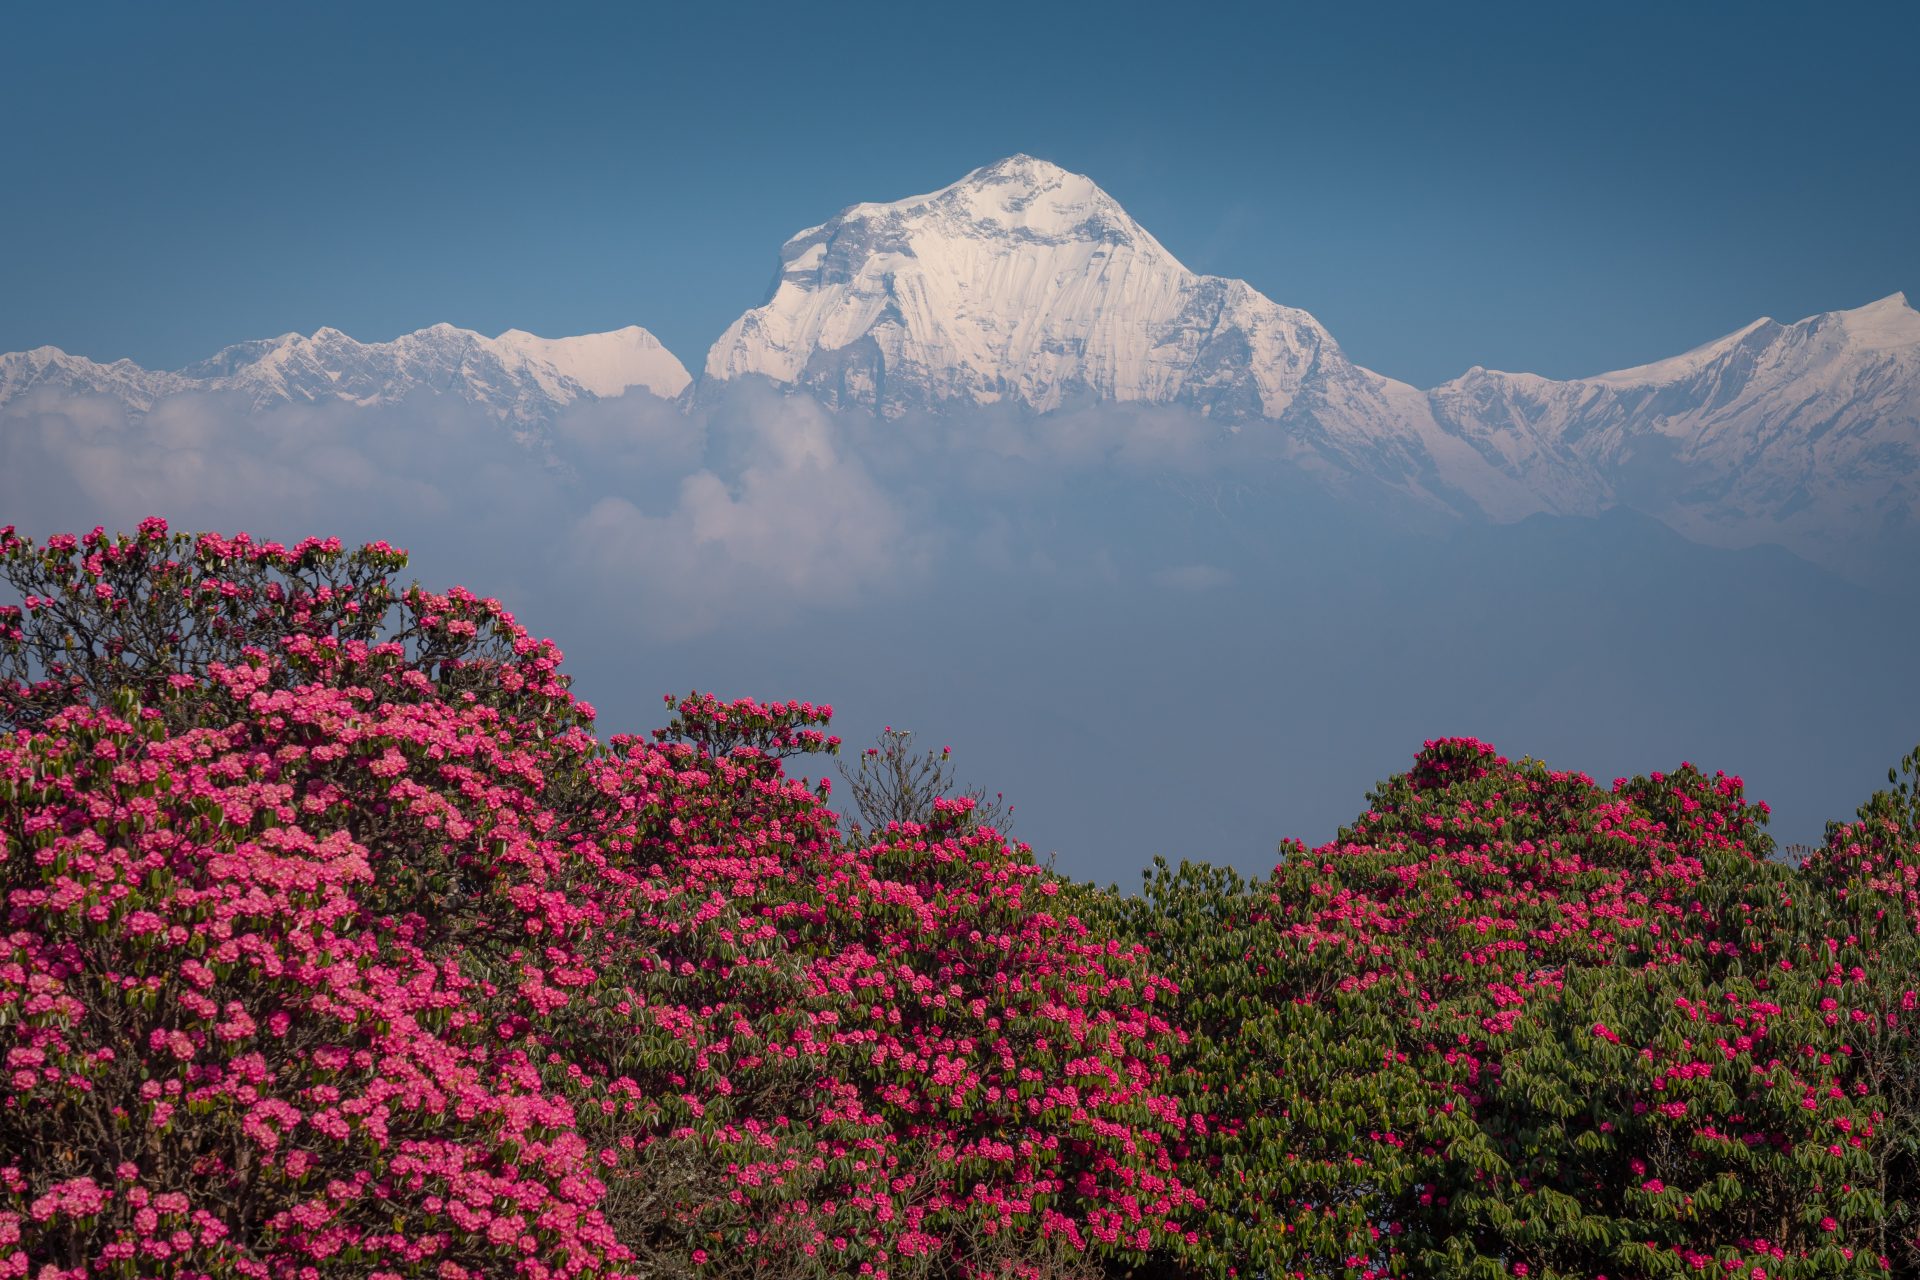 Rhododendron blooms in the Himalayas 